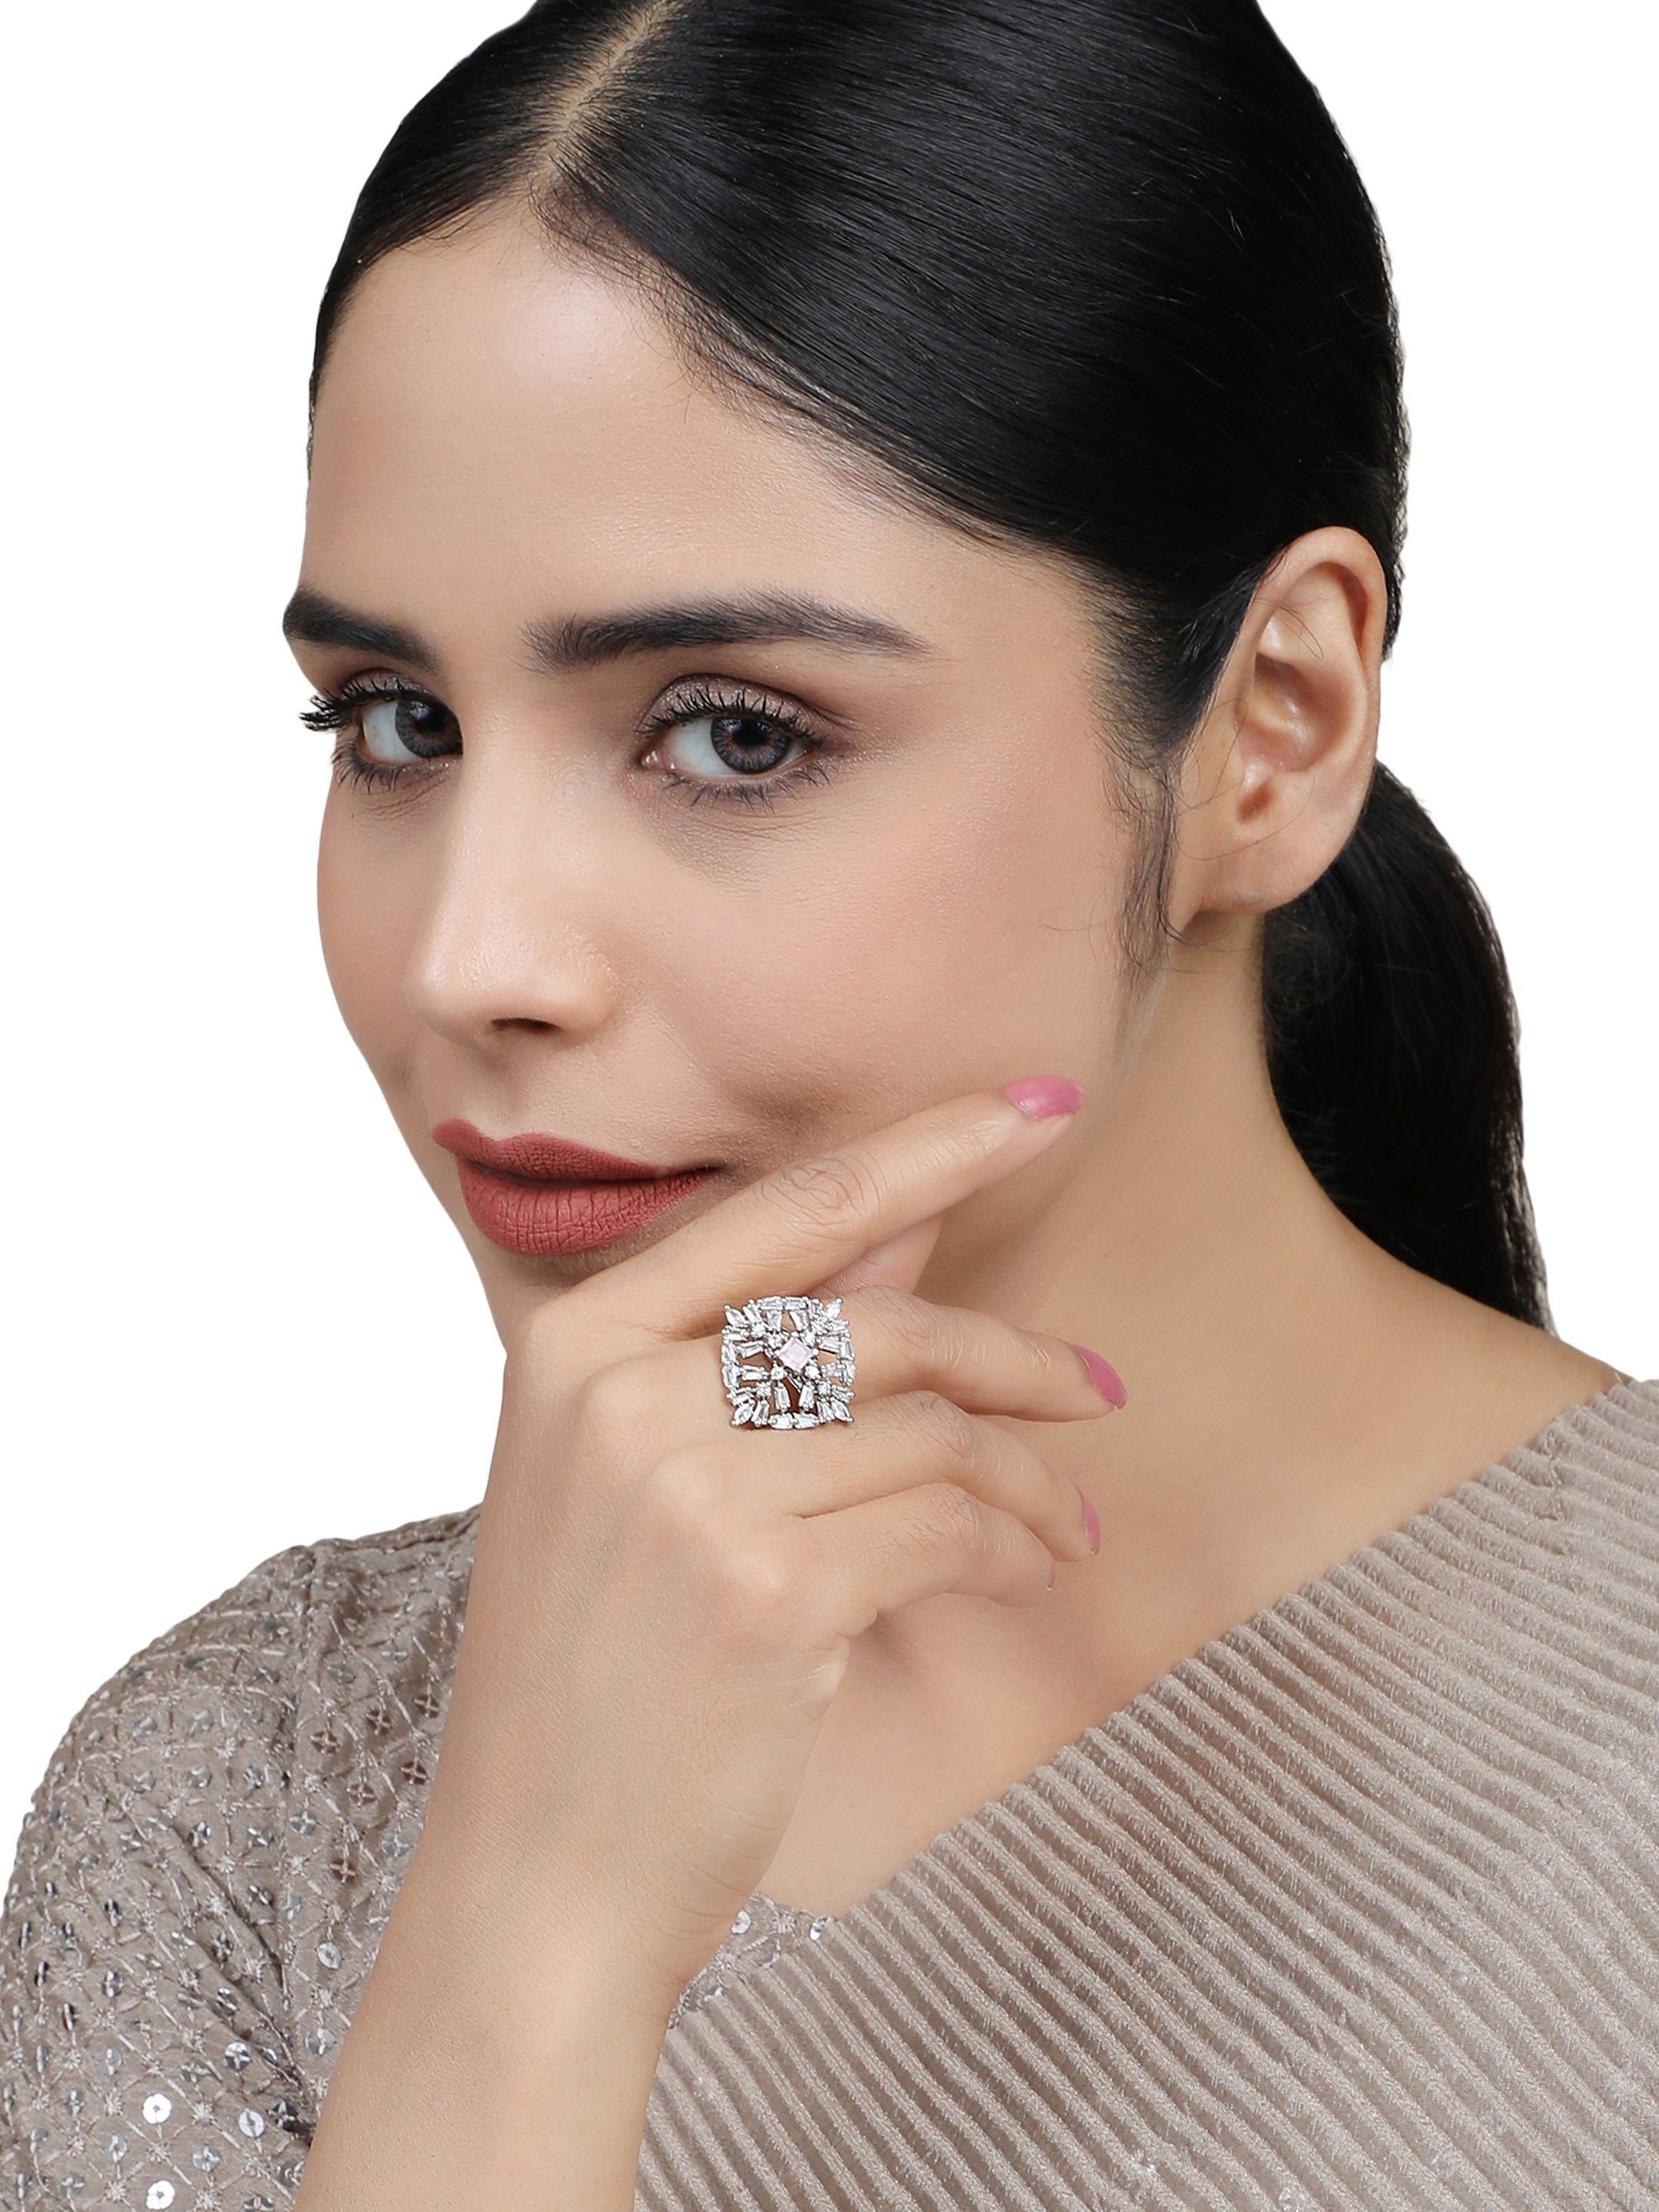 Women's Stylish American Diamond Studded Silver Plated Square Shaped Adjustable Ring - Anikas Creation